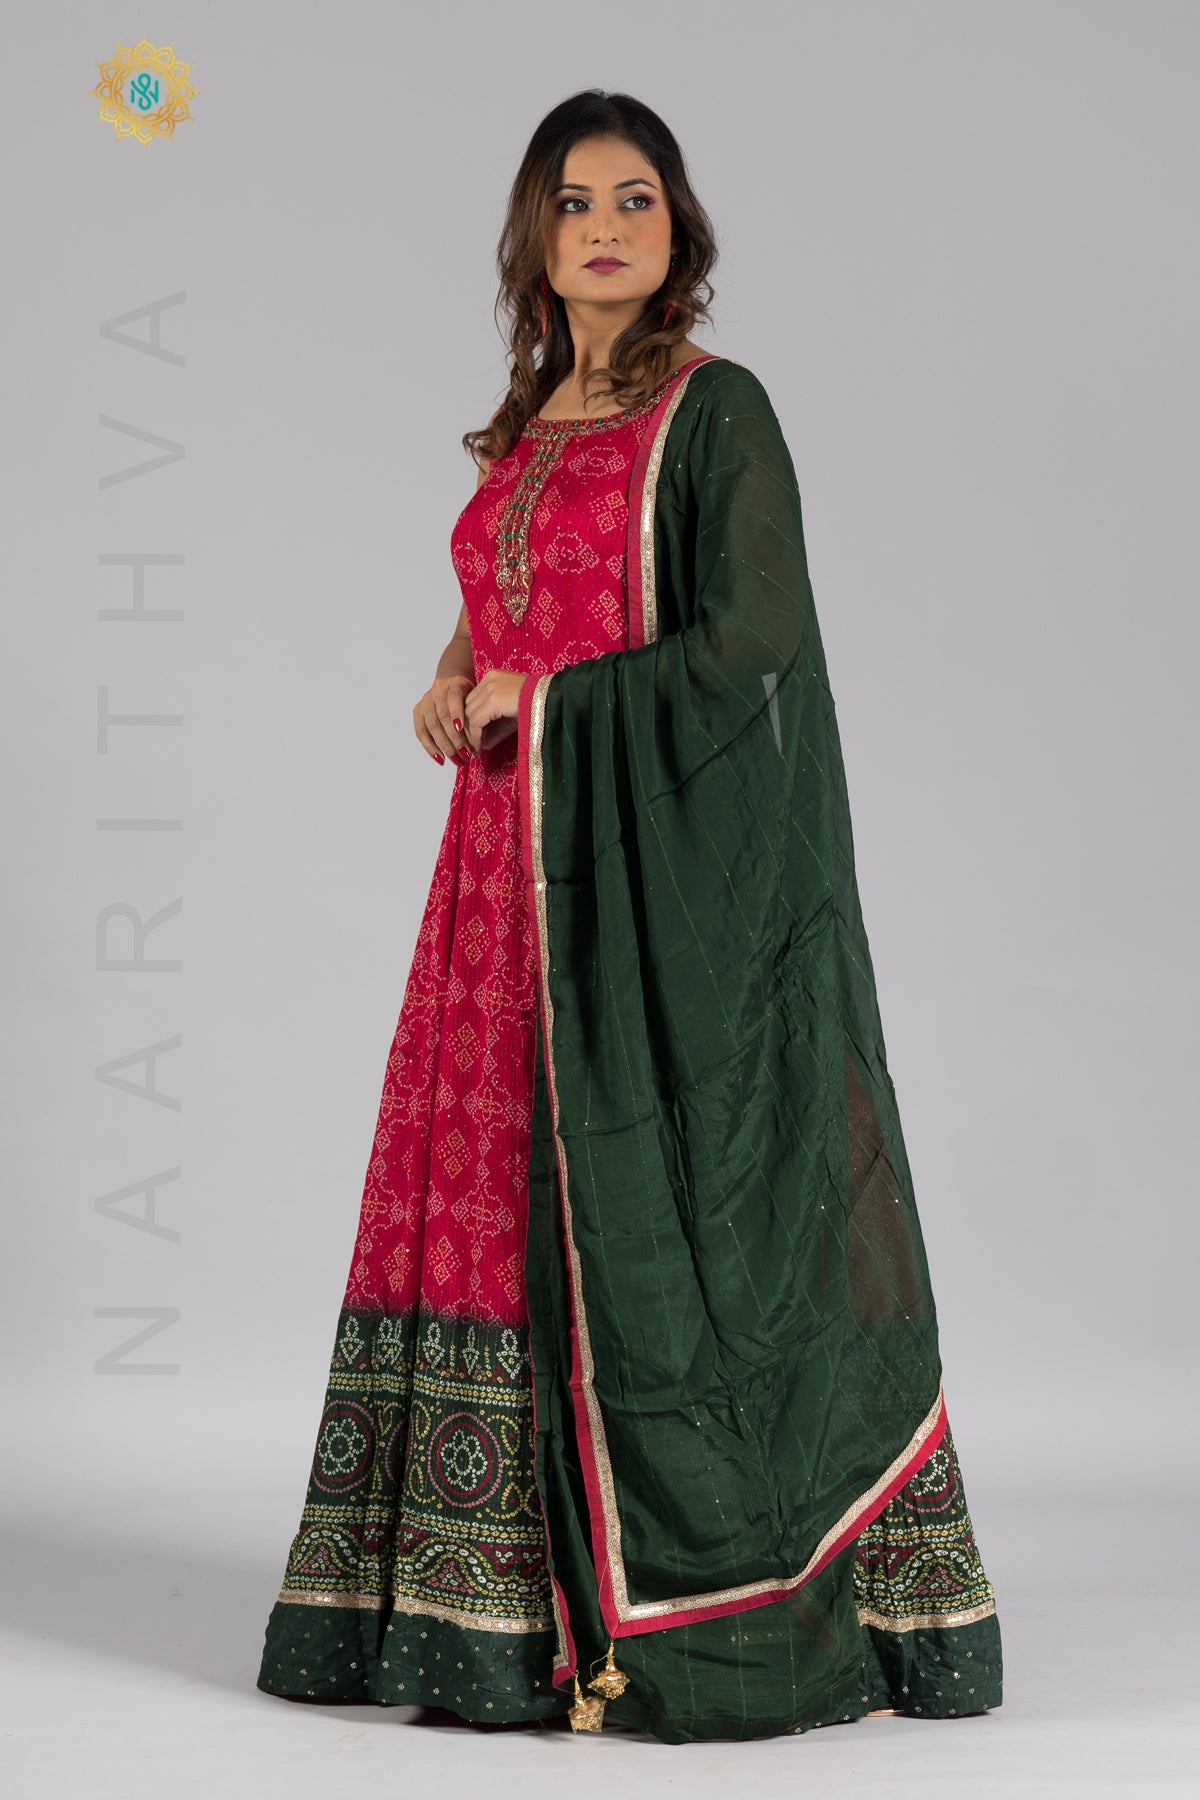 PINK WITH GREEN - PARTY WEAR GOWN WITH NECK LINE HAND WORK & DUPATTA